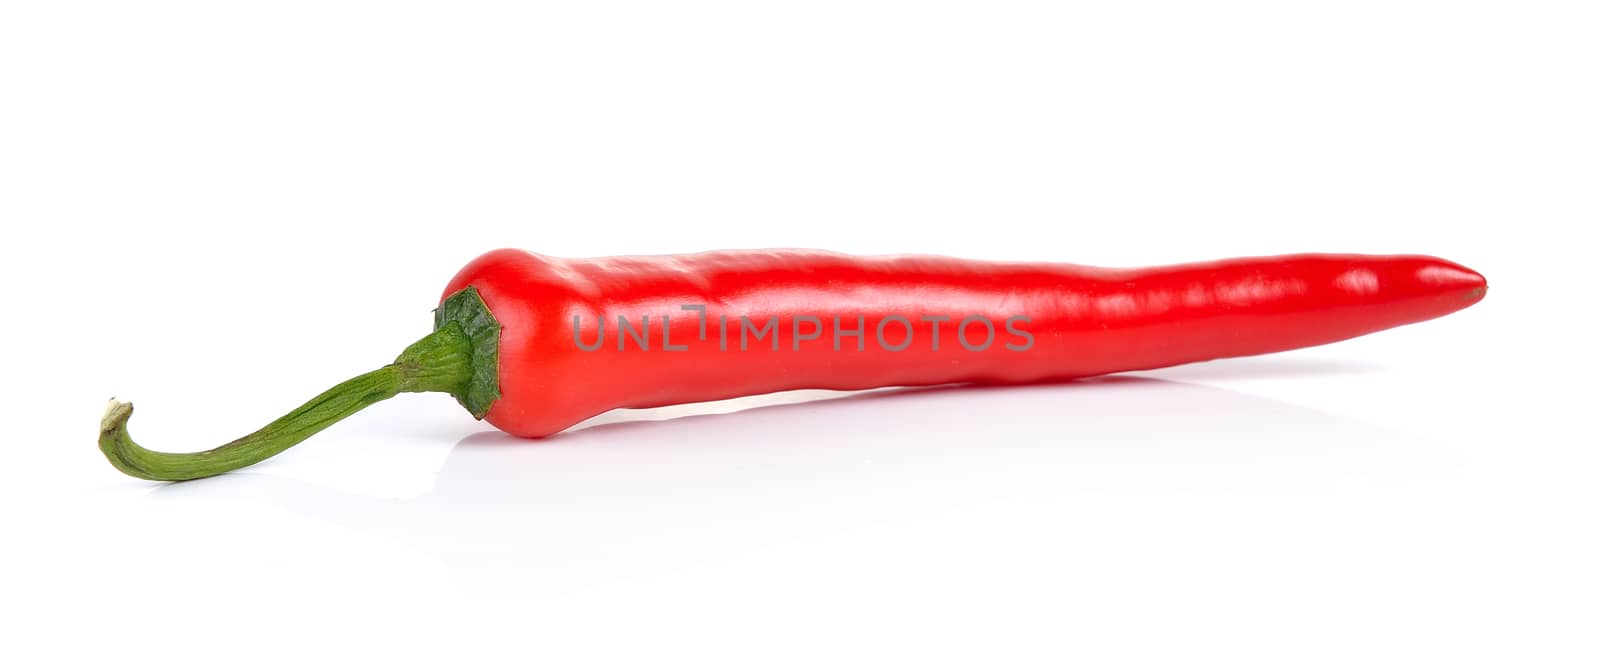 Red chili pepper isolated on a white background by sommai